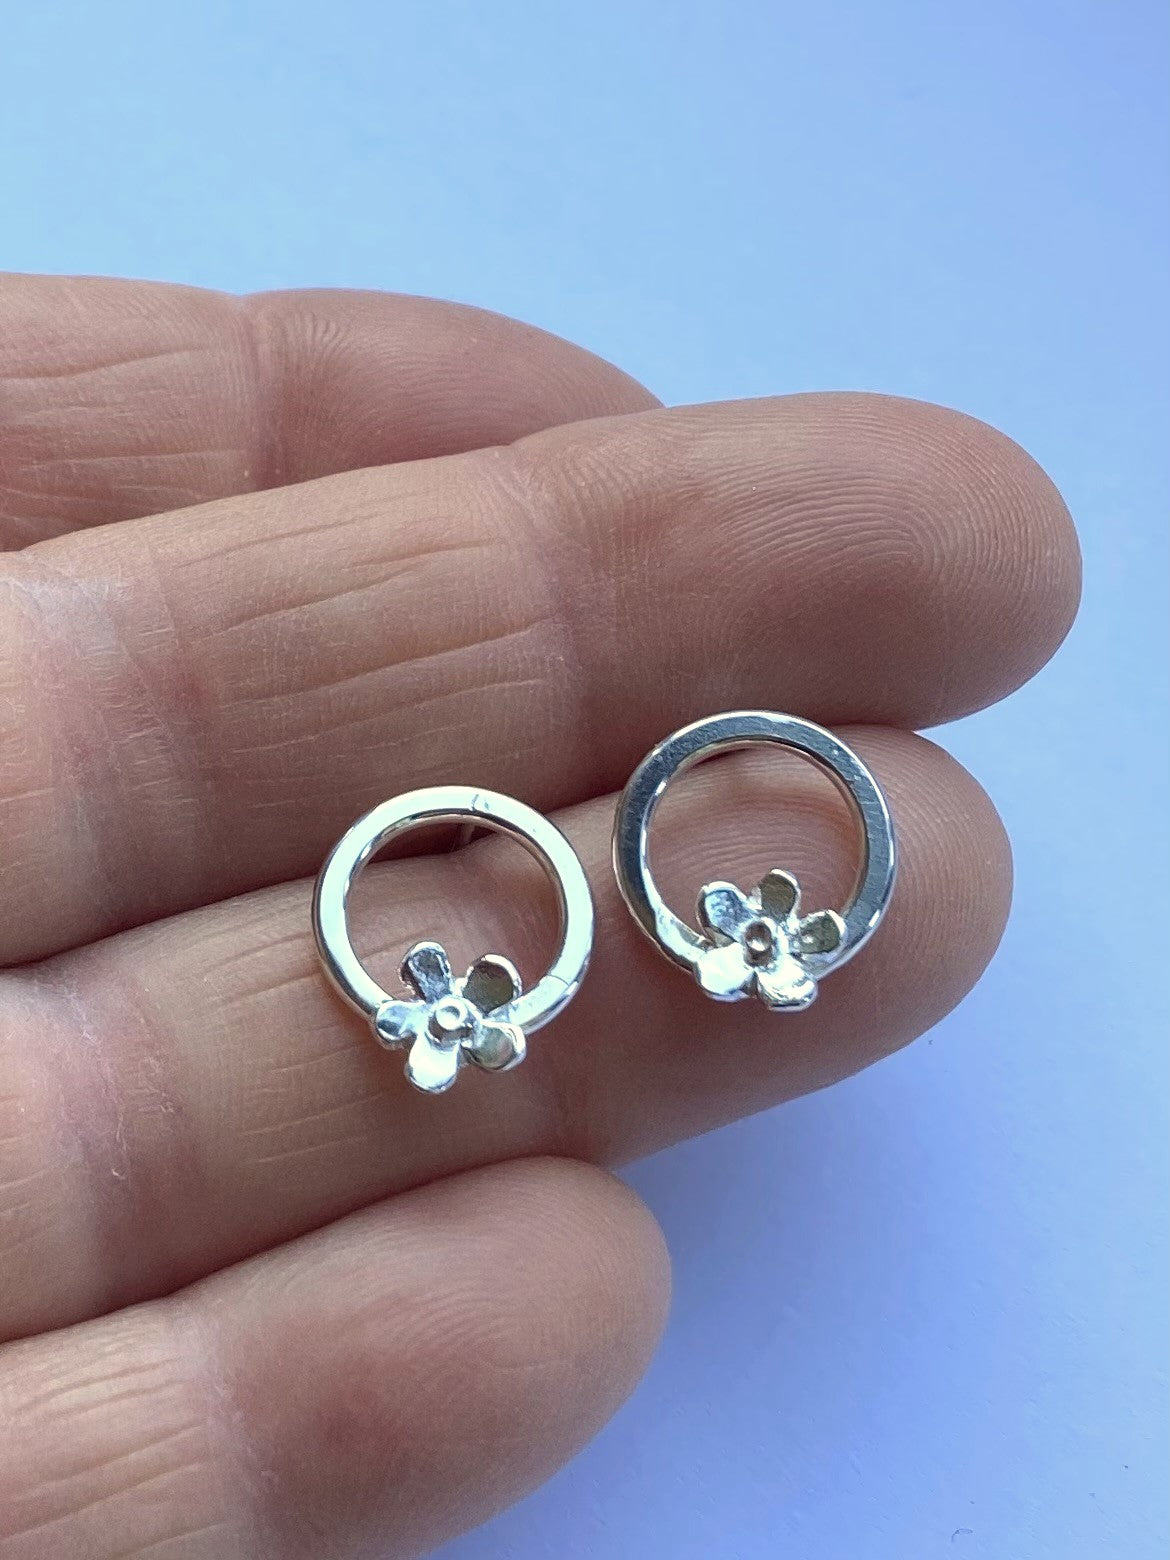 fingers holding small circle stud earring with tiny flowers